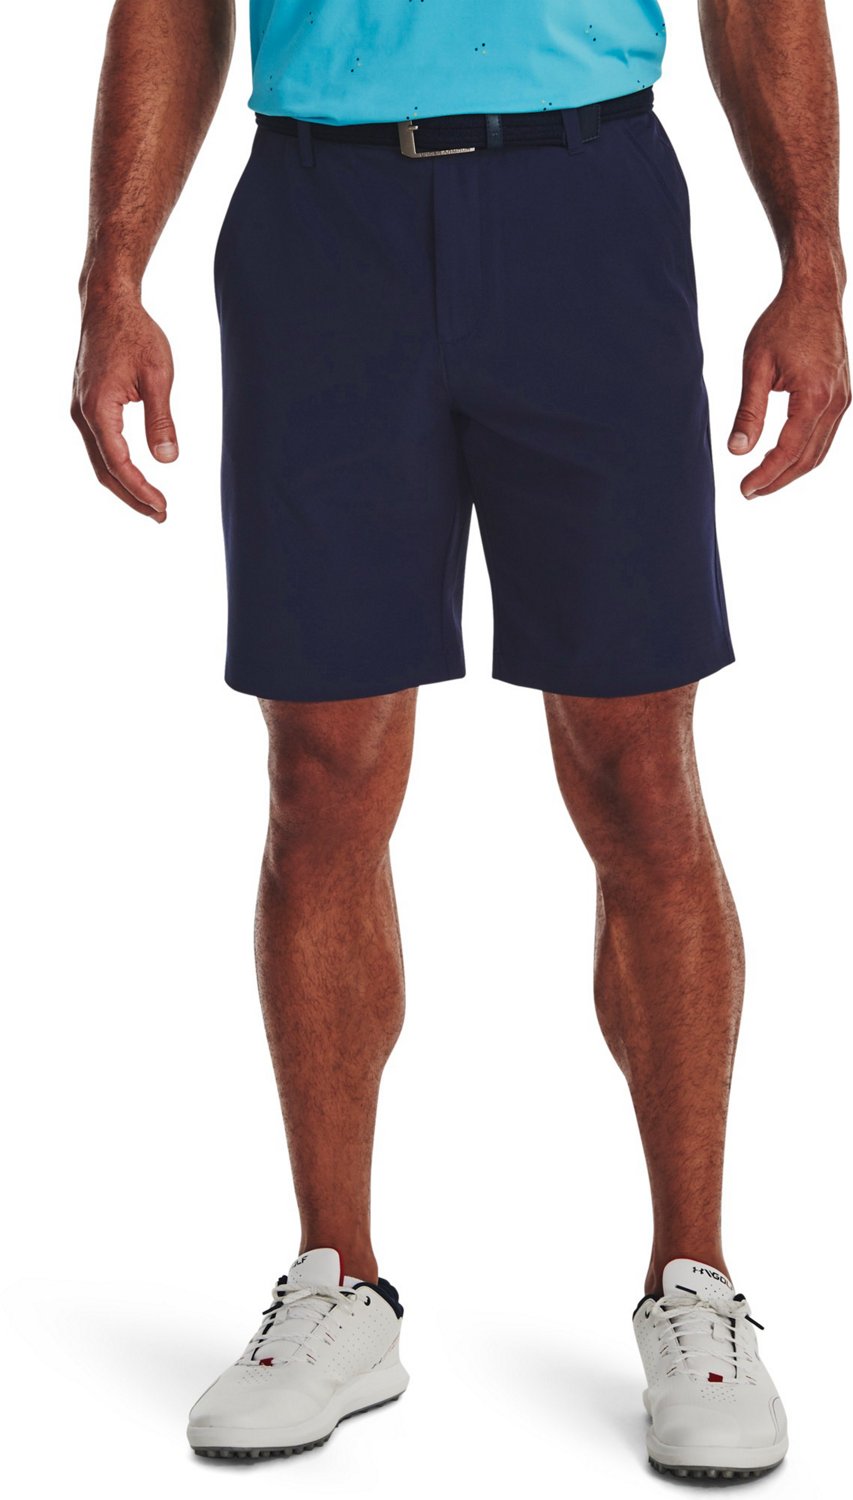 Under Armour Men's Drive Shorts 10 in